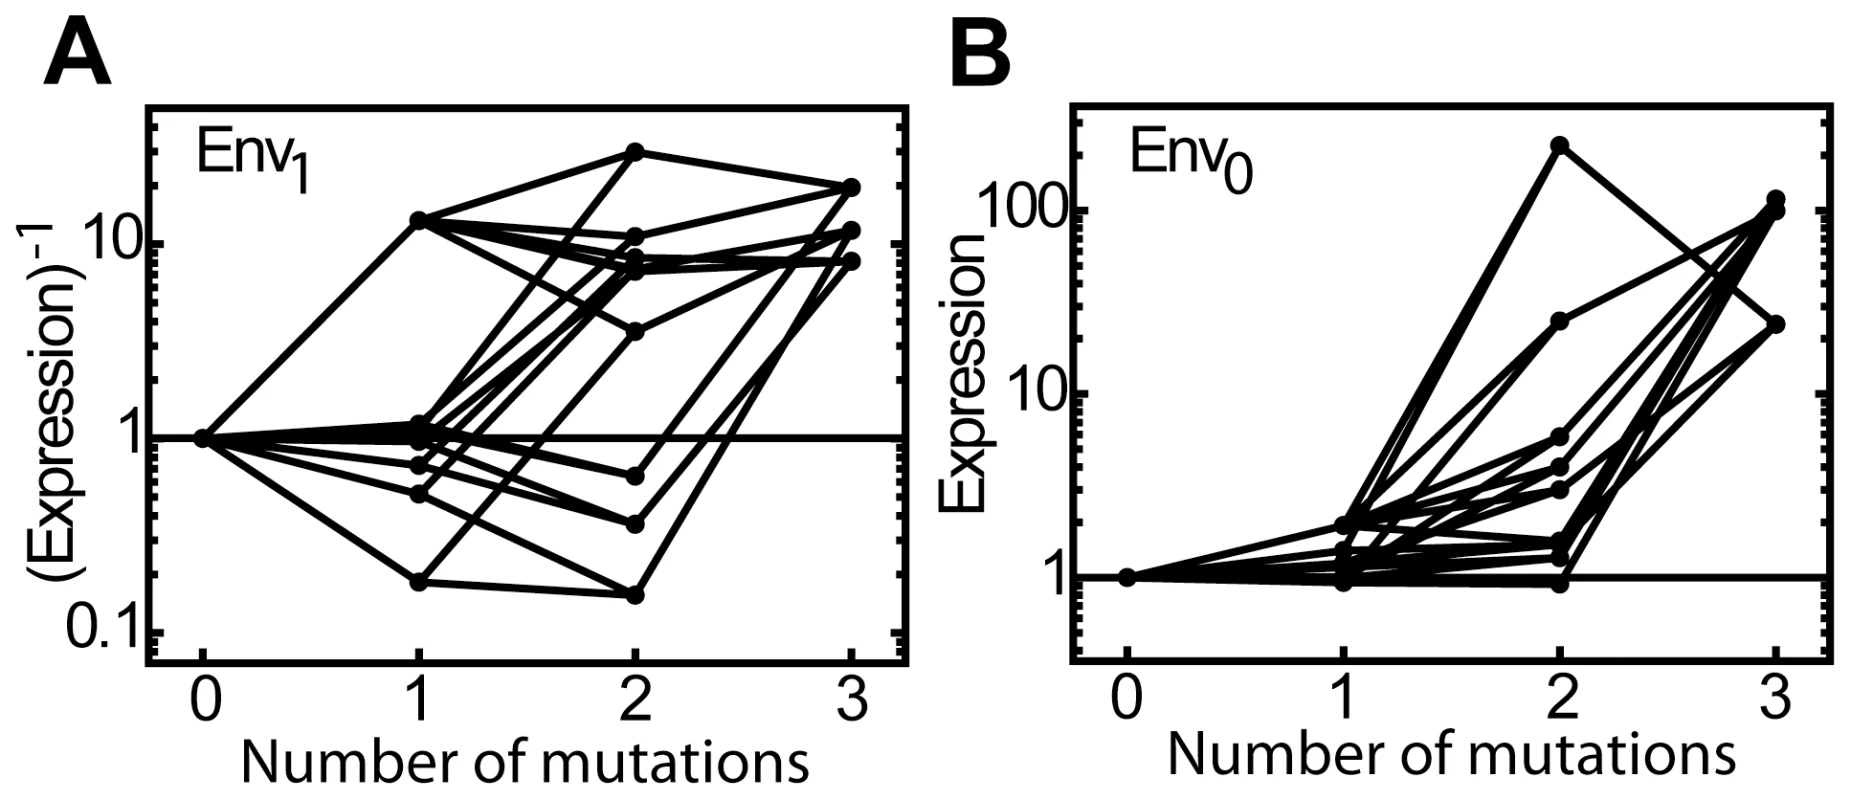 Mutational effects on expression in both environments.